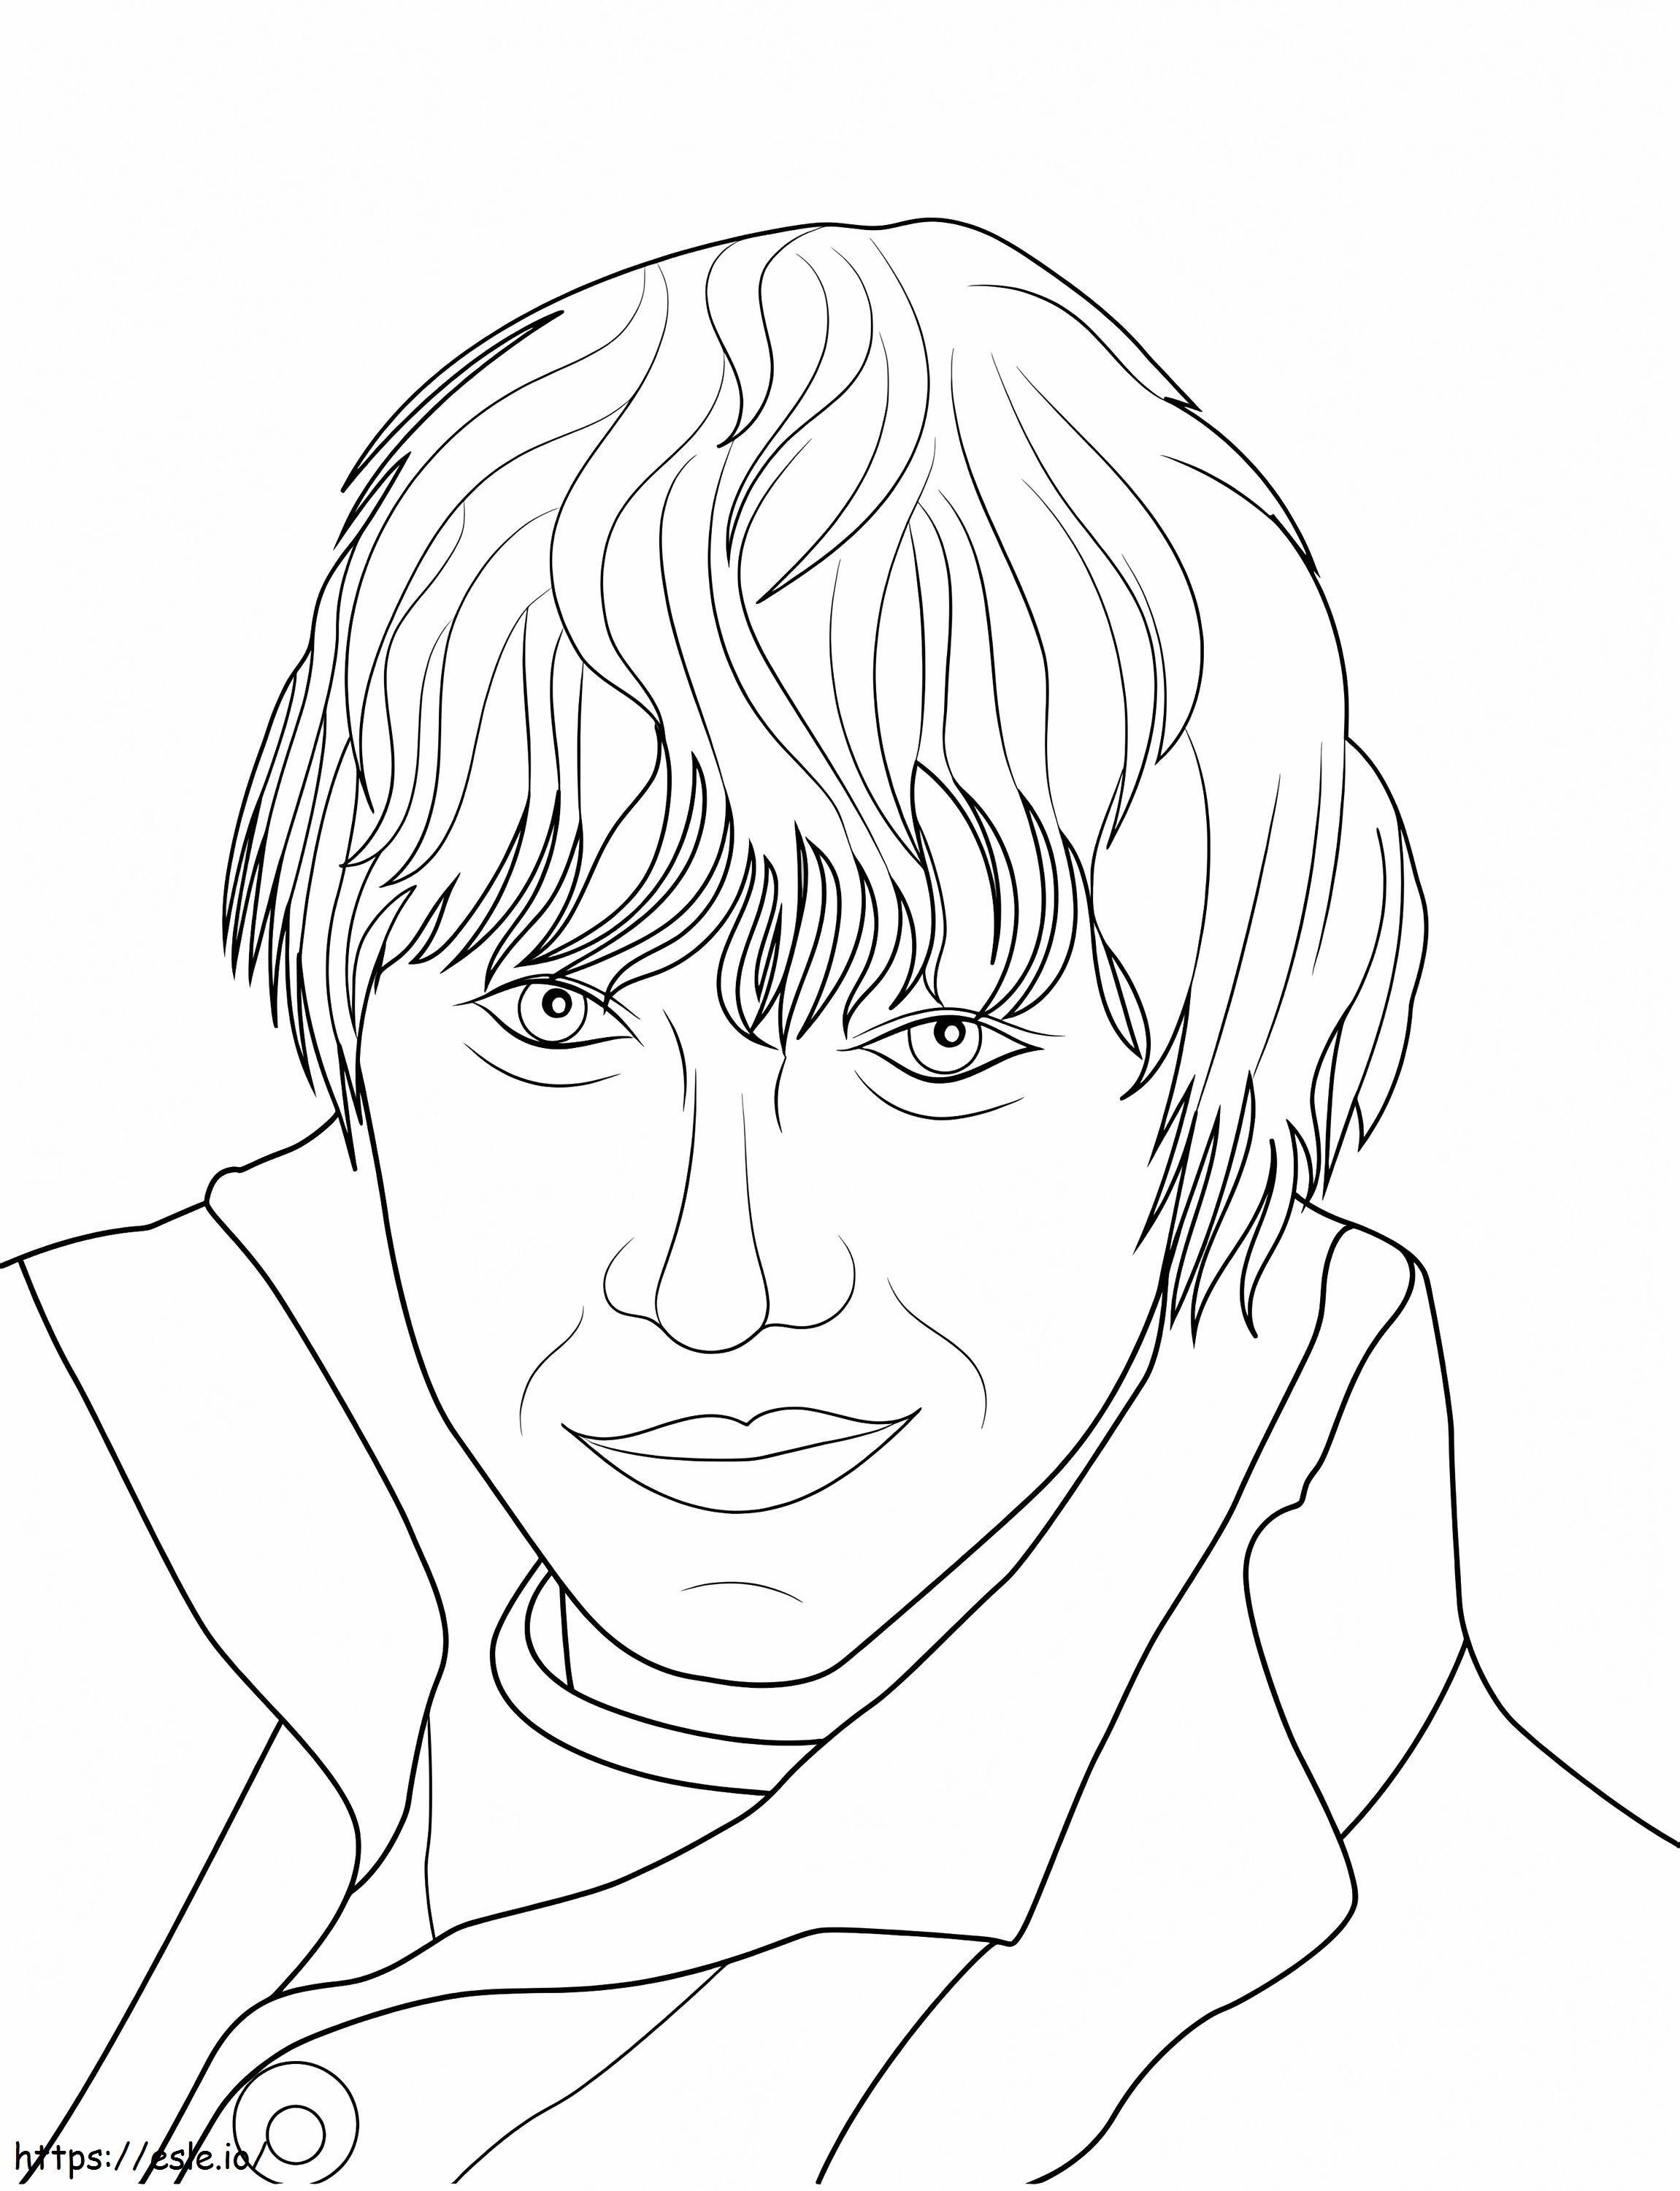 Ronald Weasley From Harry Potter coloring page